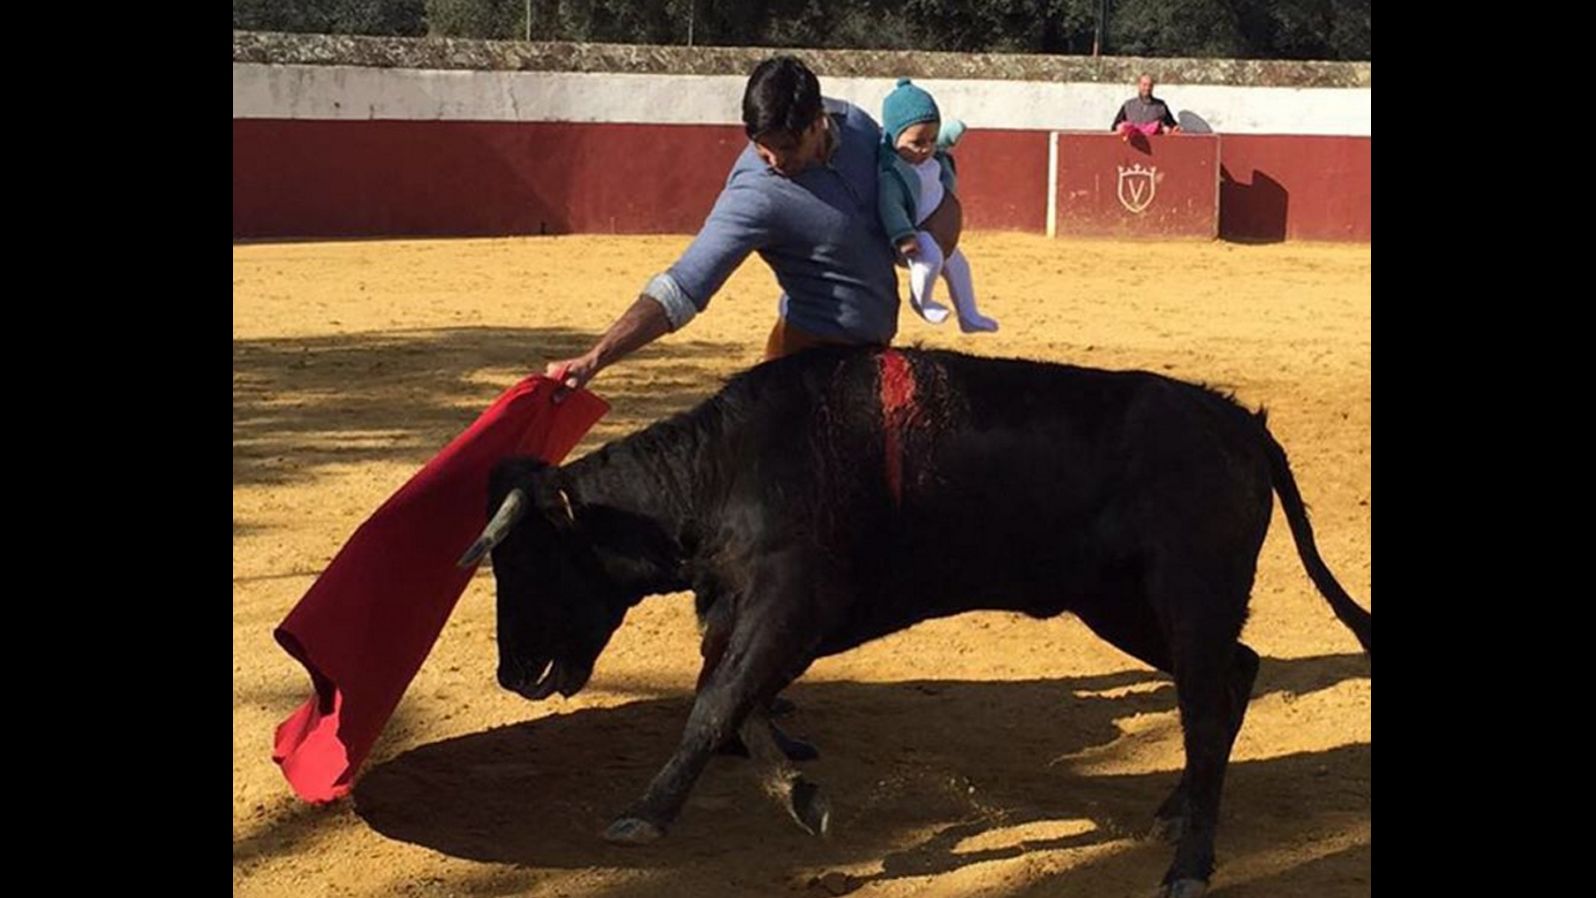 Spanish bullfighter Francisco Rivera Ordóñez posted this image on social media, sparking outrage online.